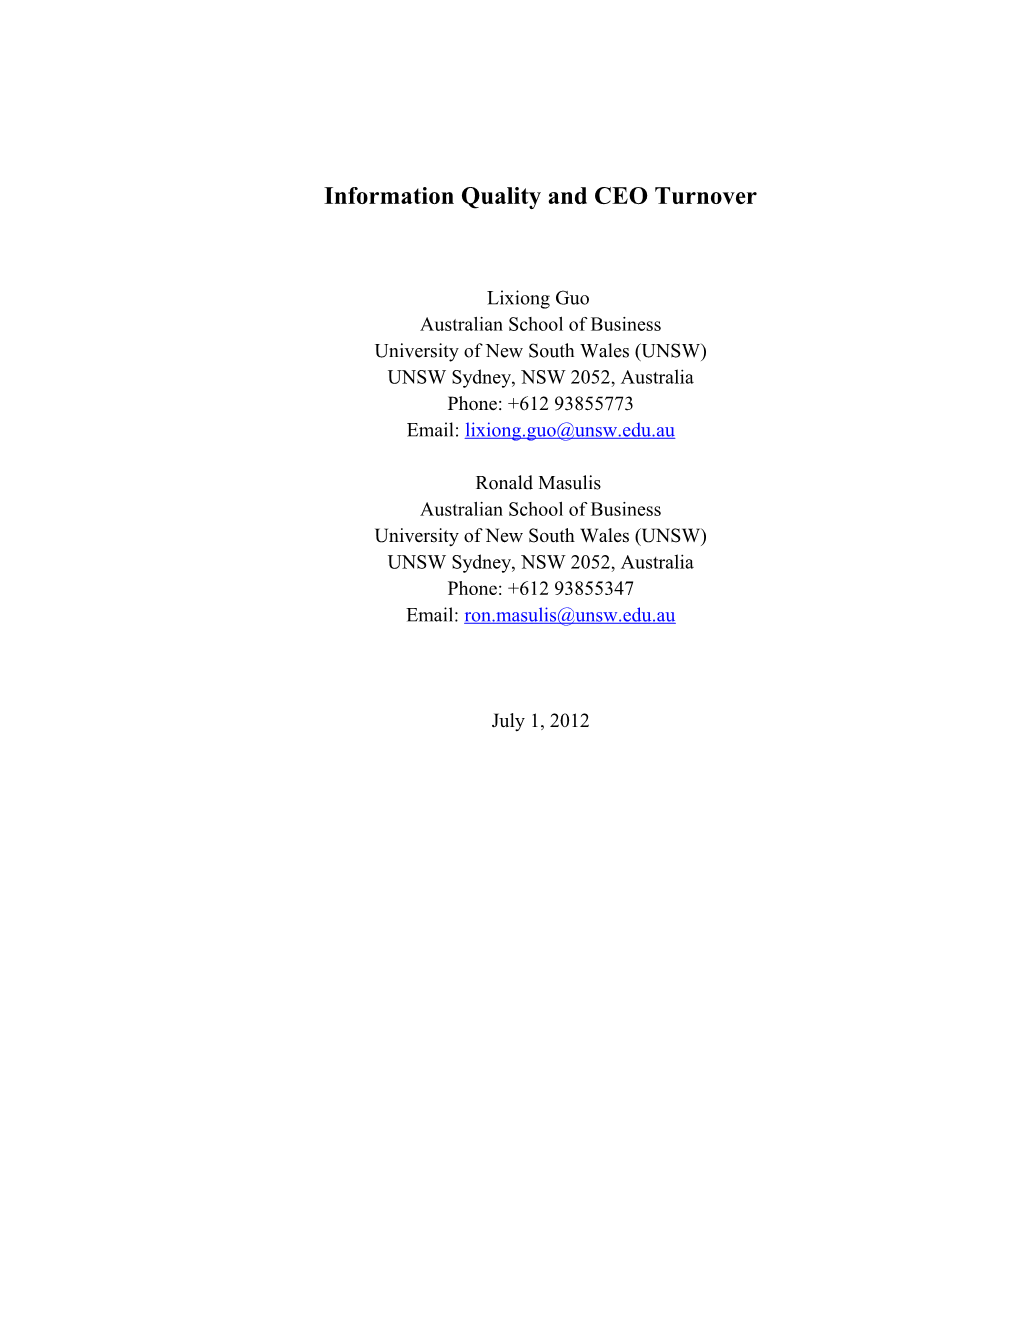 Information Quality and CEO Turnover